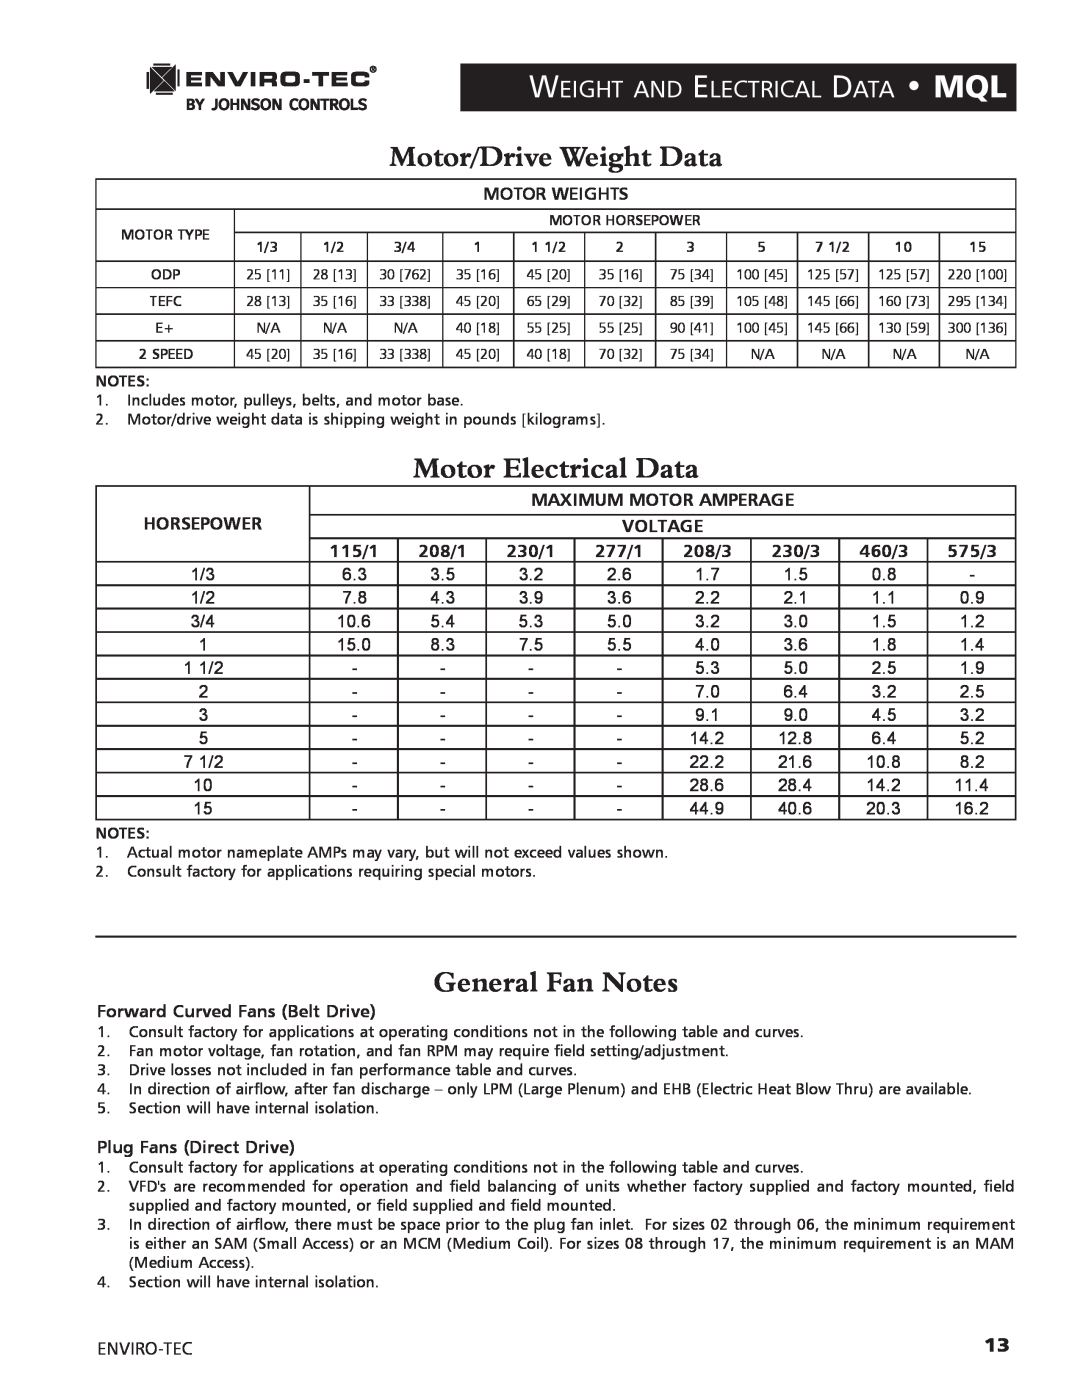 Enviro 170S5FG Motor/Drive Weight Data, Motor Electrical Data, General Fan Notes, Weight And Electrical Data Mql, 115/1 